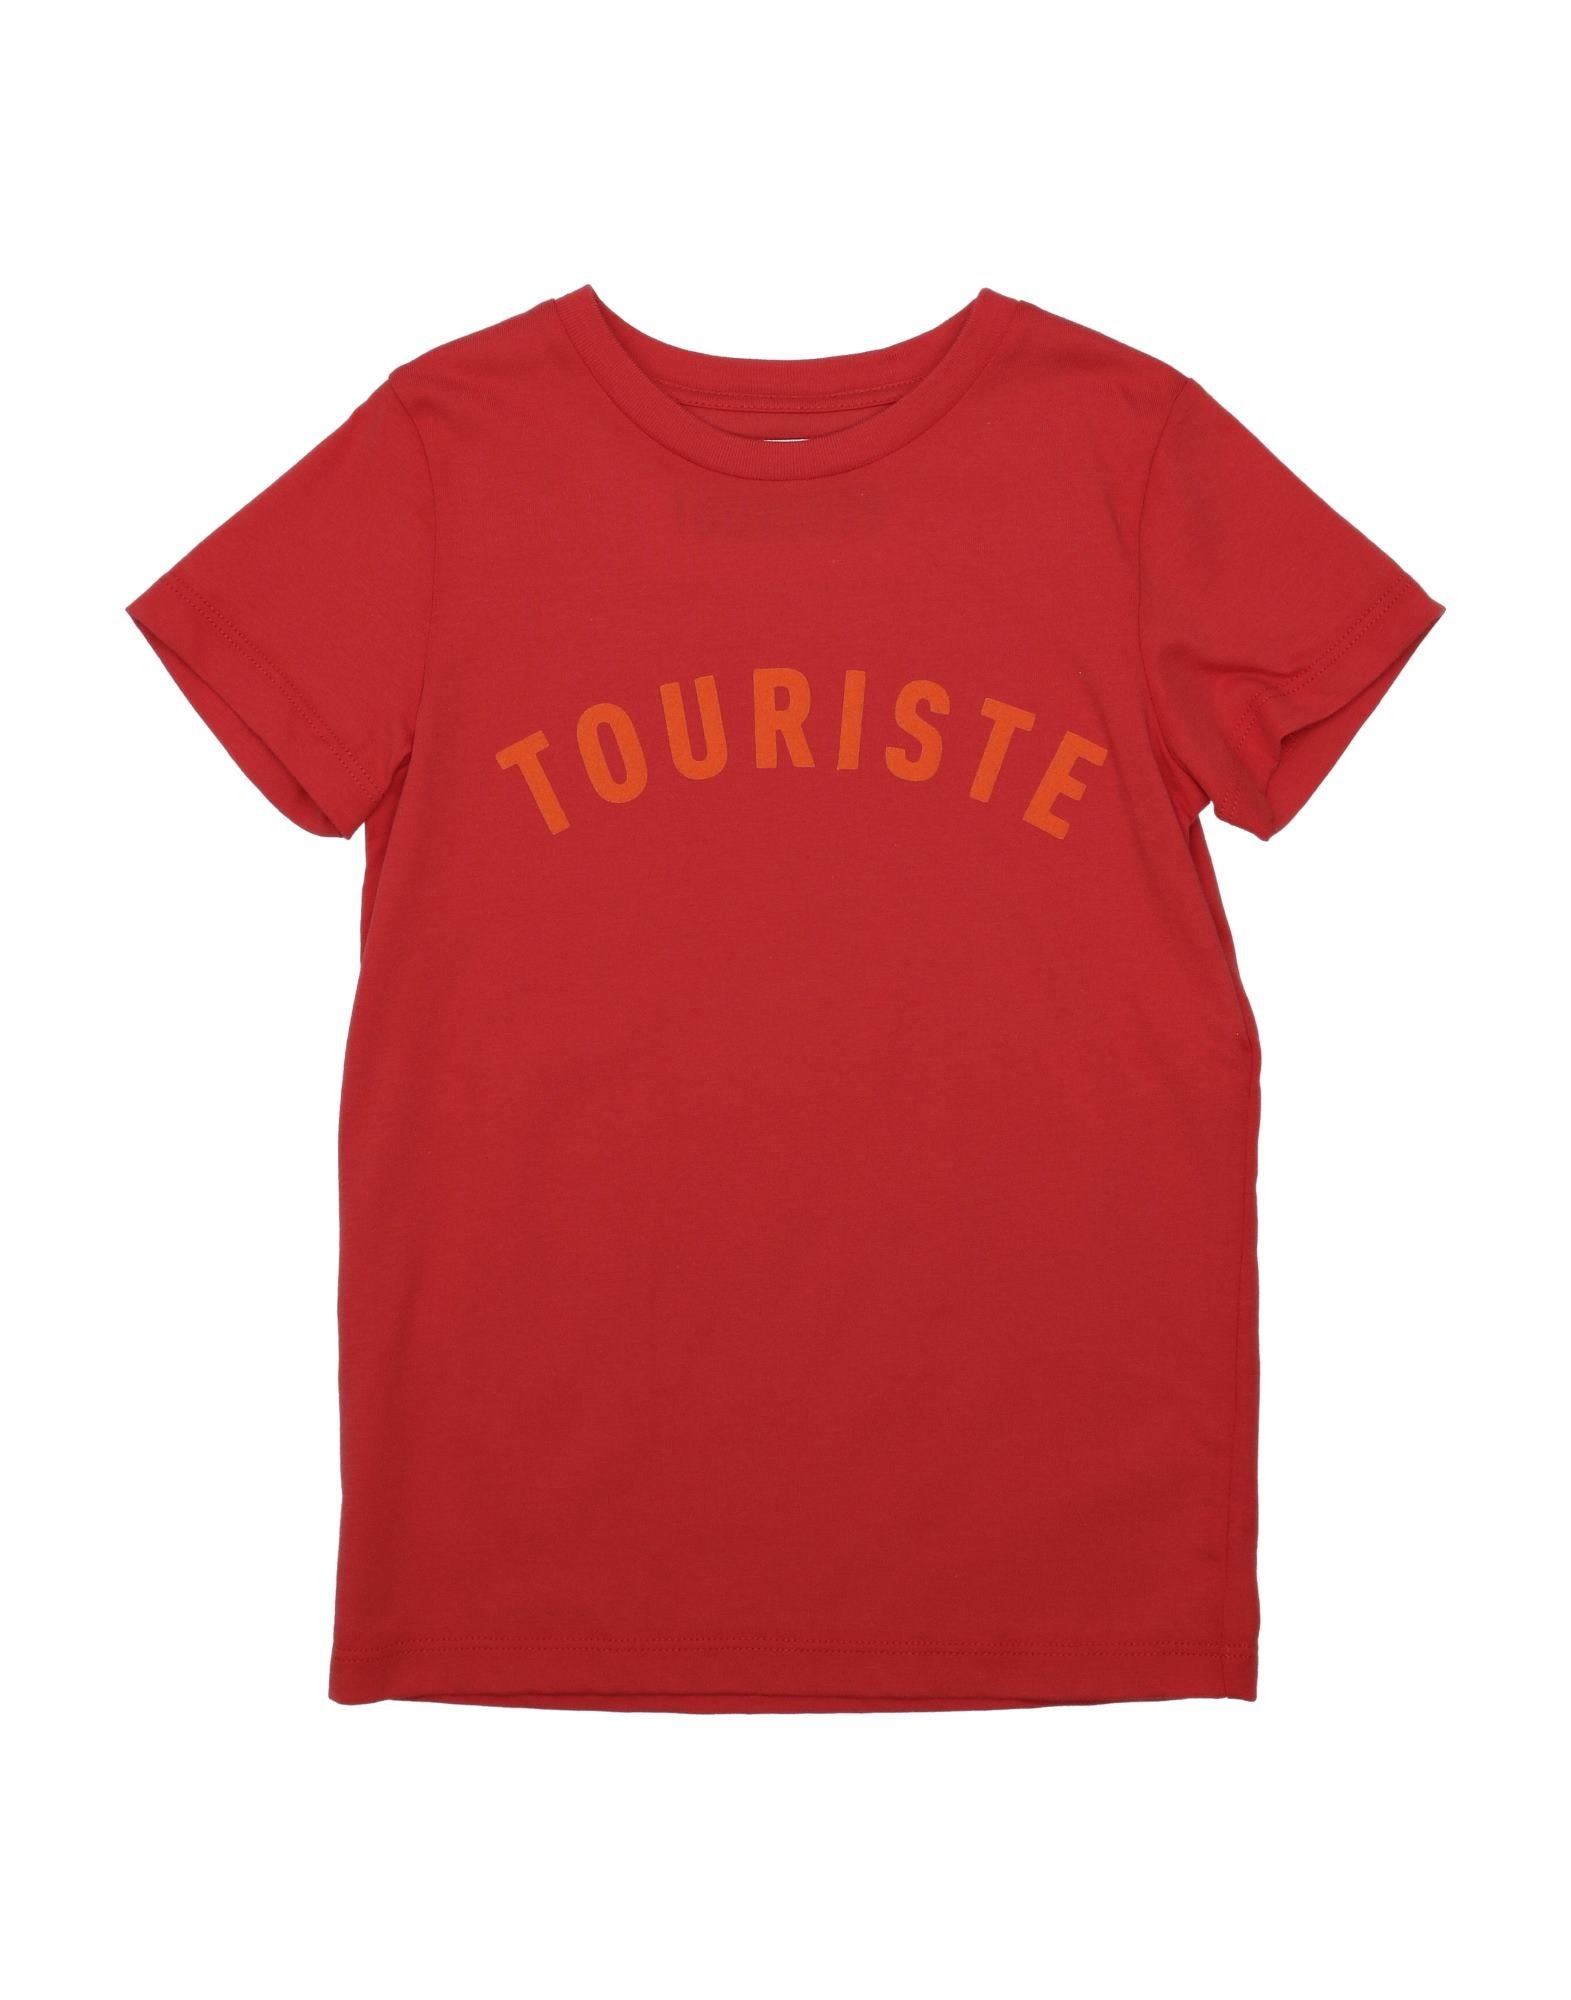 Touriste Kids' T-shirts In Red